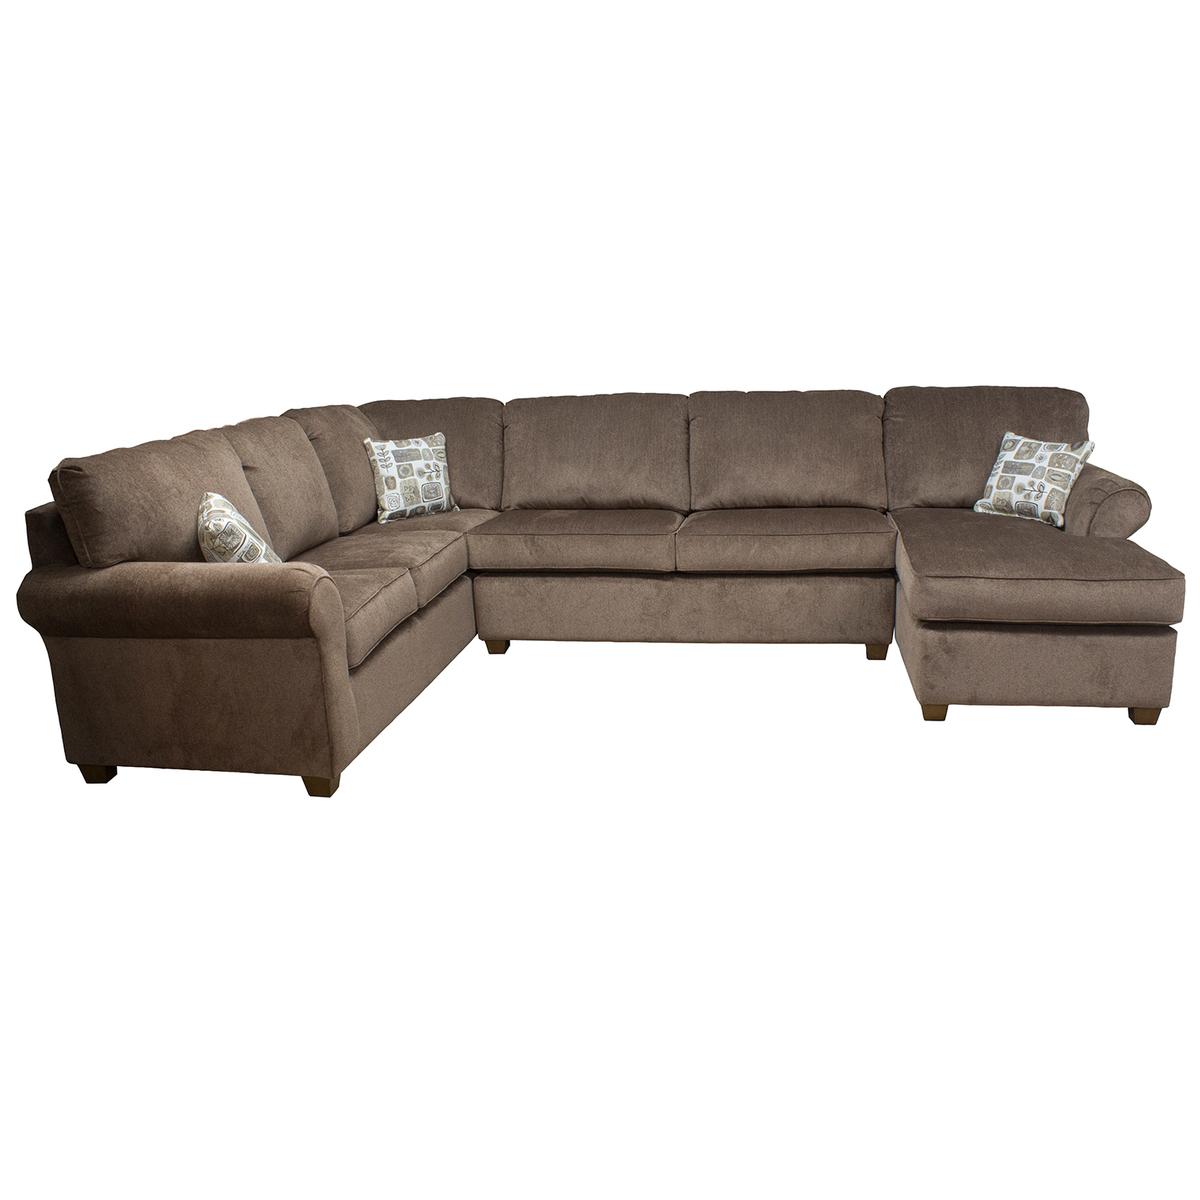 Best Craft 2000 Series Sectional